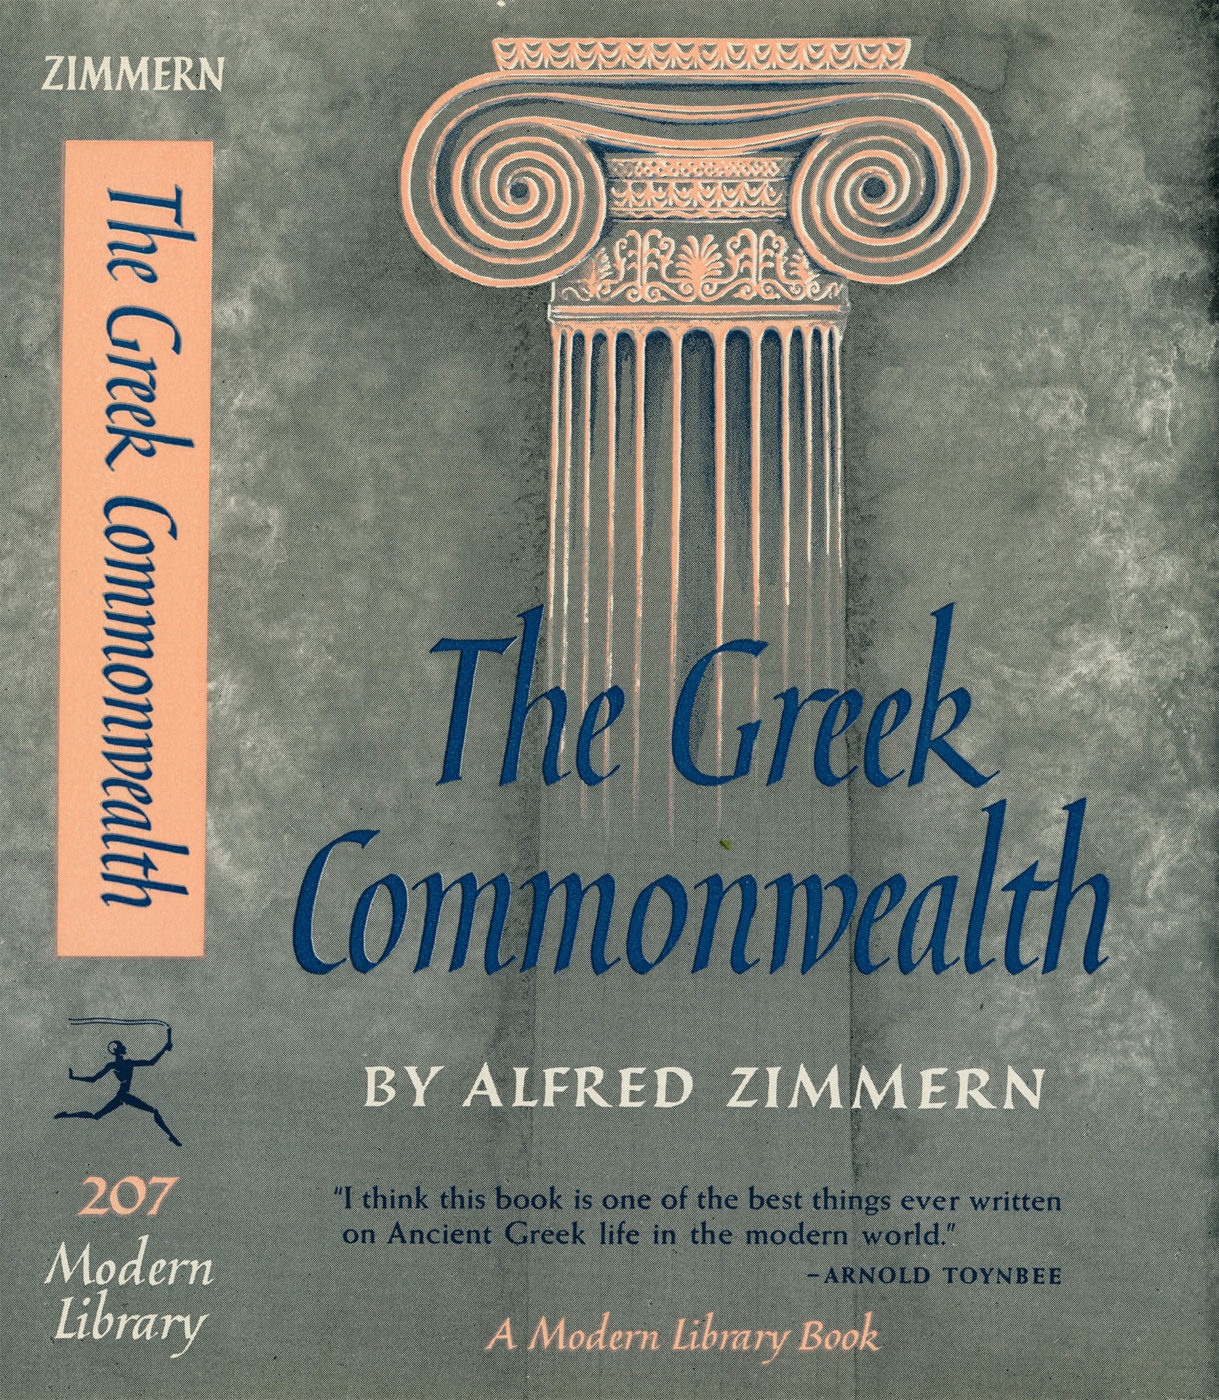 Book jacket of The Greek Commonwealth